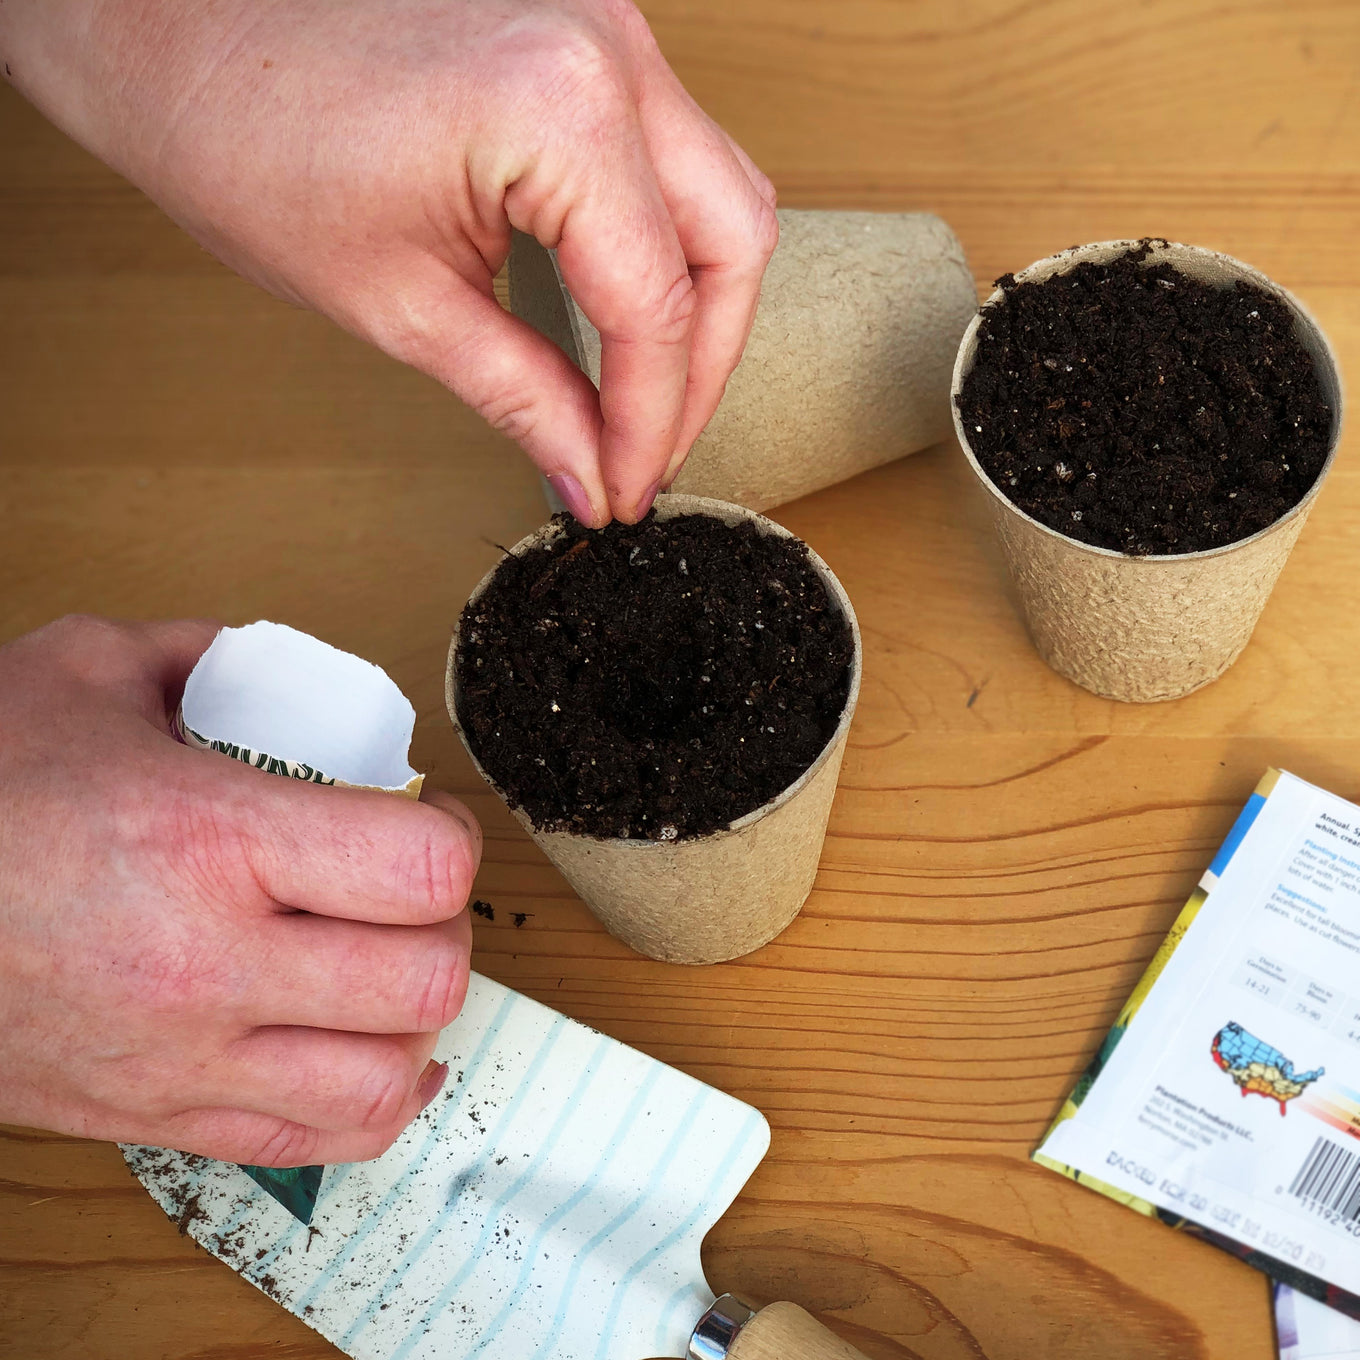 Start your Organic Early Prolific Straightneck Squash seeds in Jiffy biodegradable peat pots filled with seed starting mix.